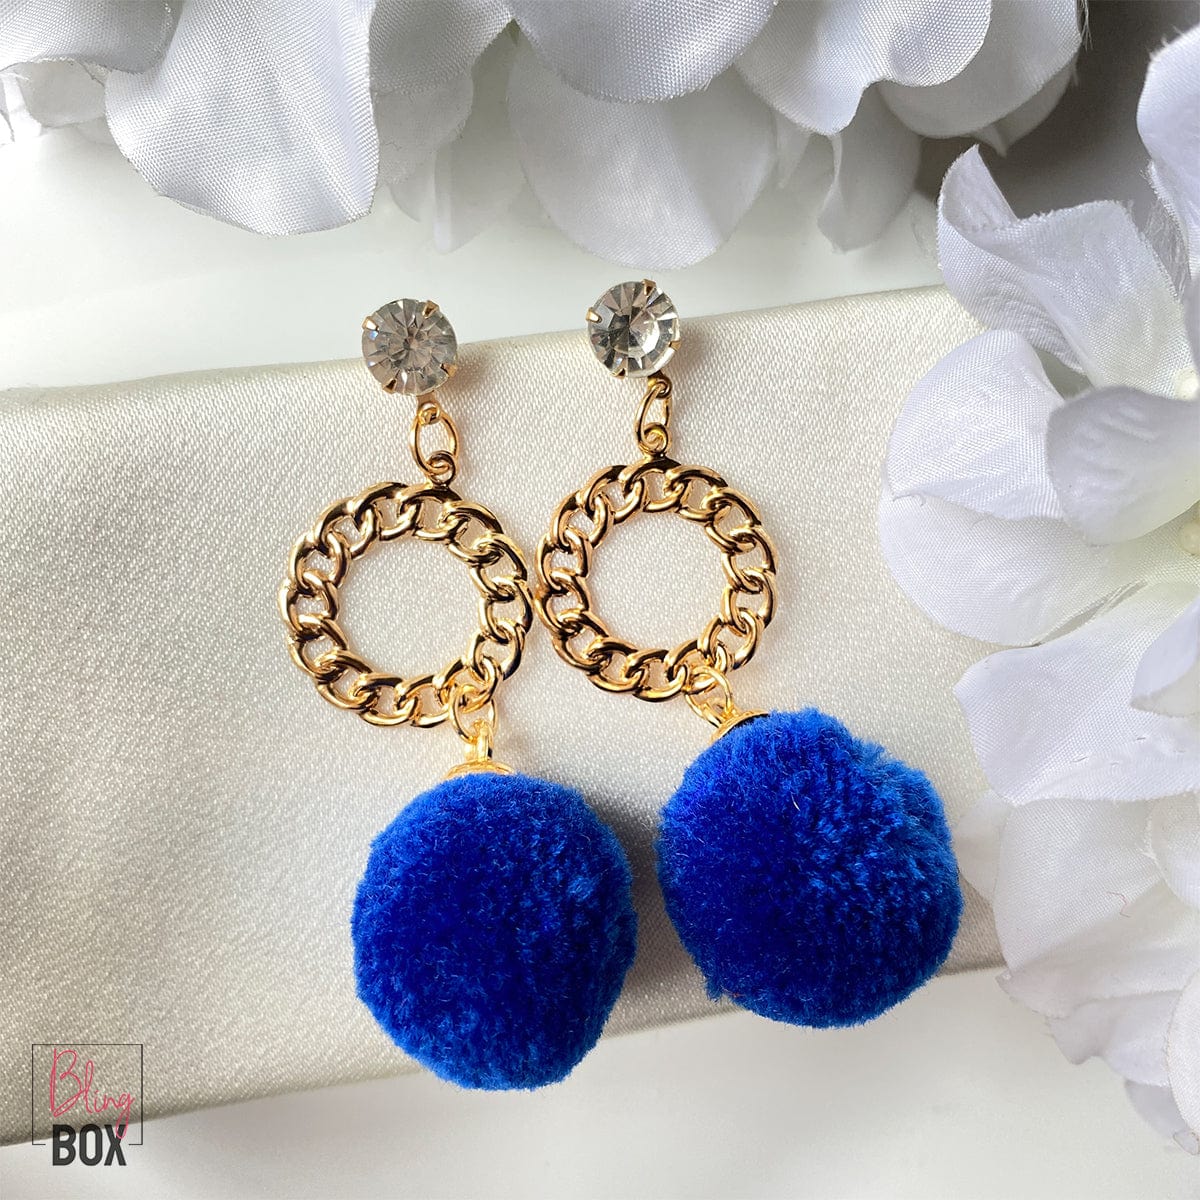 I made earrings for the first time in years. I made 50 pairs! And also 20  new pom pom cushions. What do you think of these ones? : r/crafts